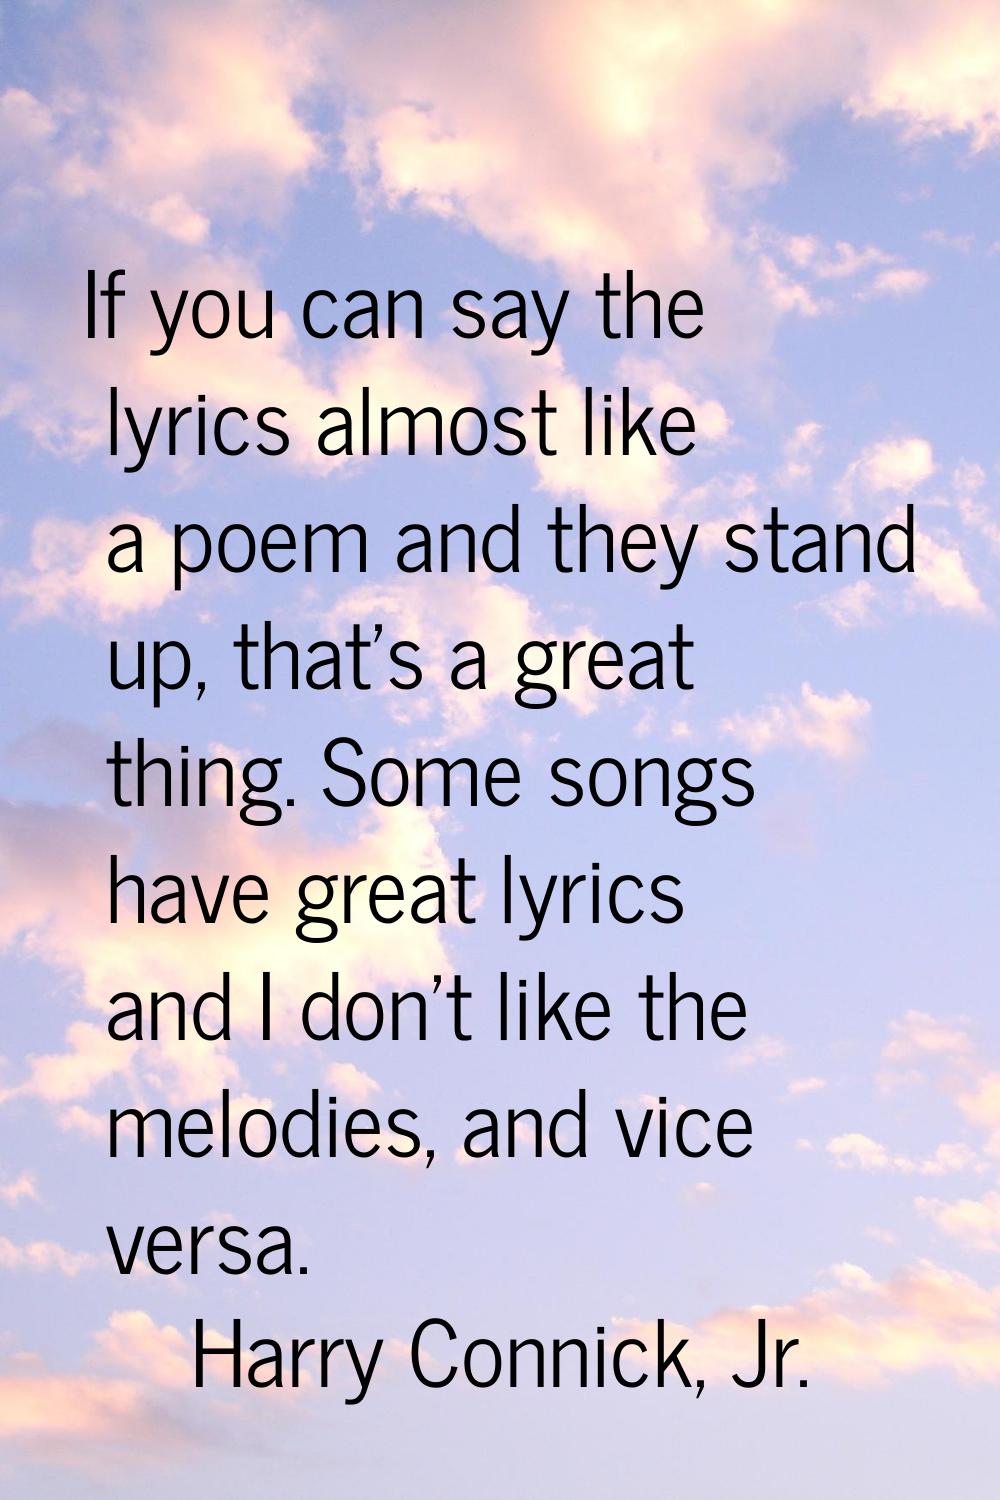 If you can say the lyrics almost like a poem and they stand up, that's a great thing. Some songs ha